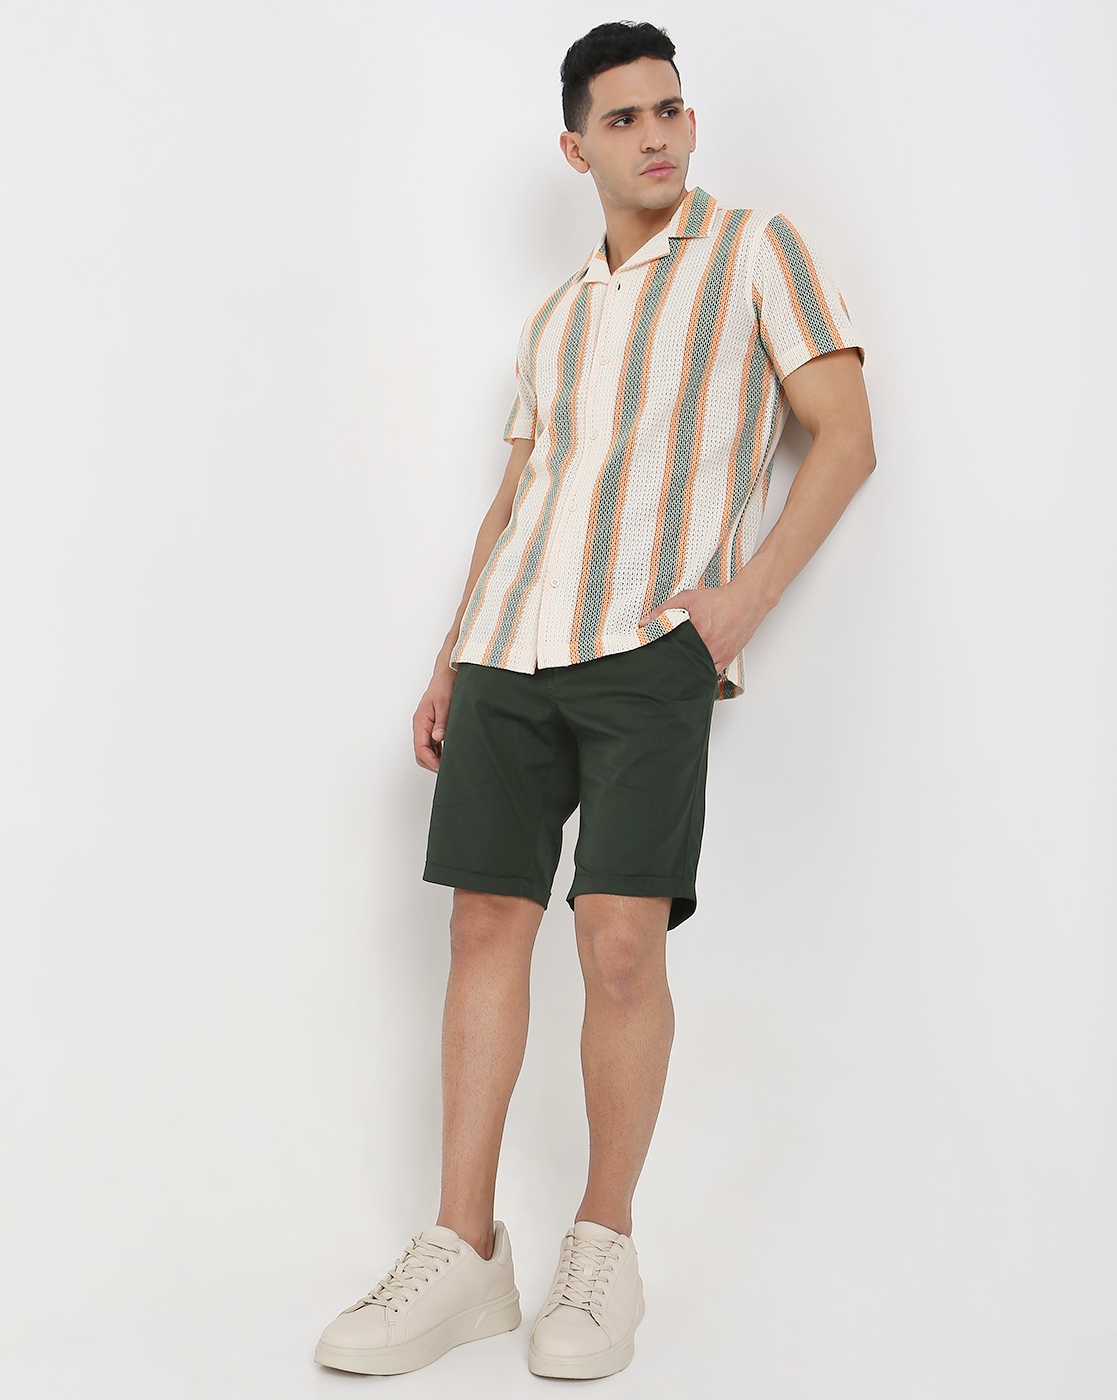 GAS | Regular Fit Striped Short Sleeve Shirt with Classic Collar